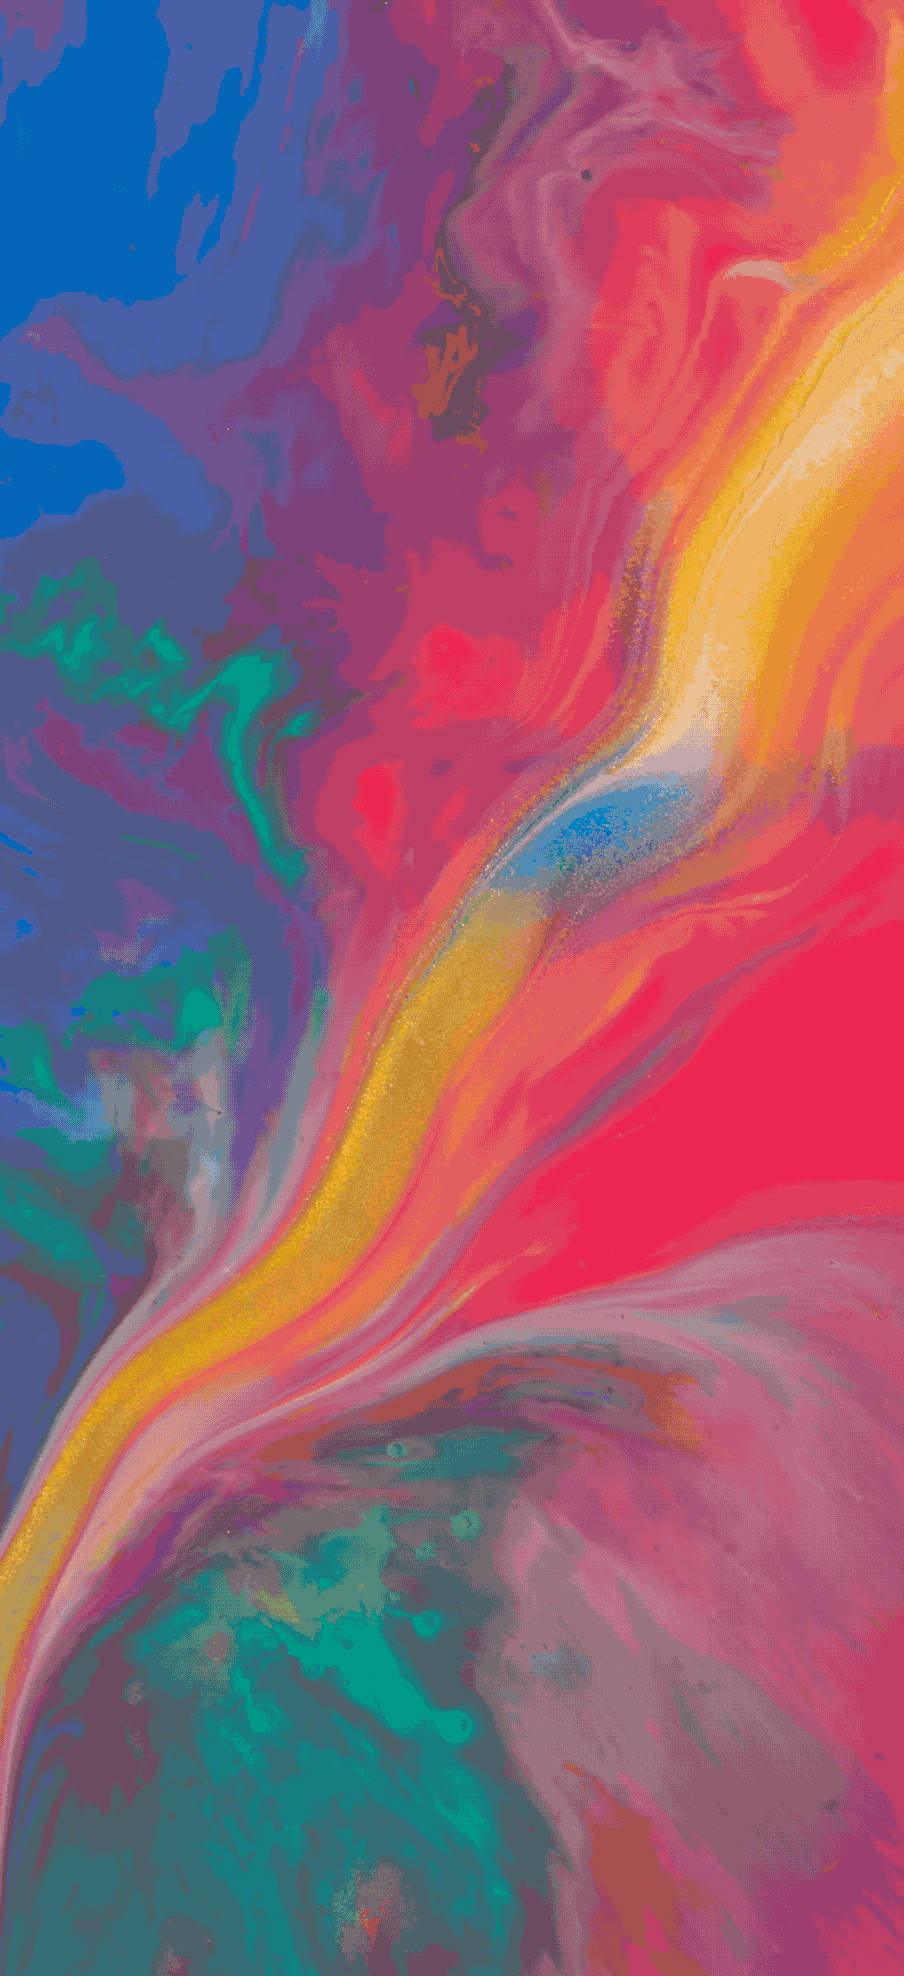 Live Colorful Abstract Artwork Wallpaper